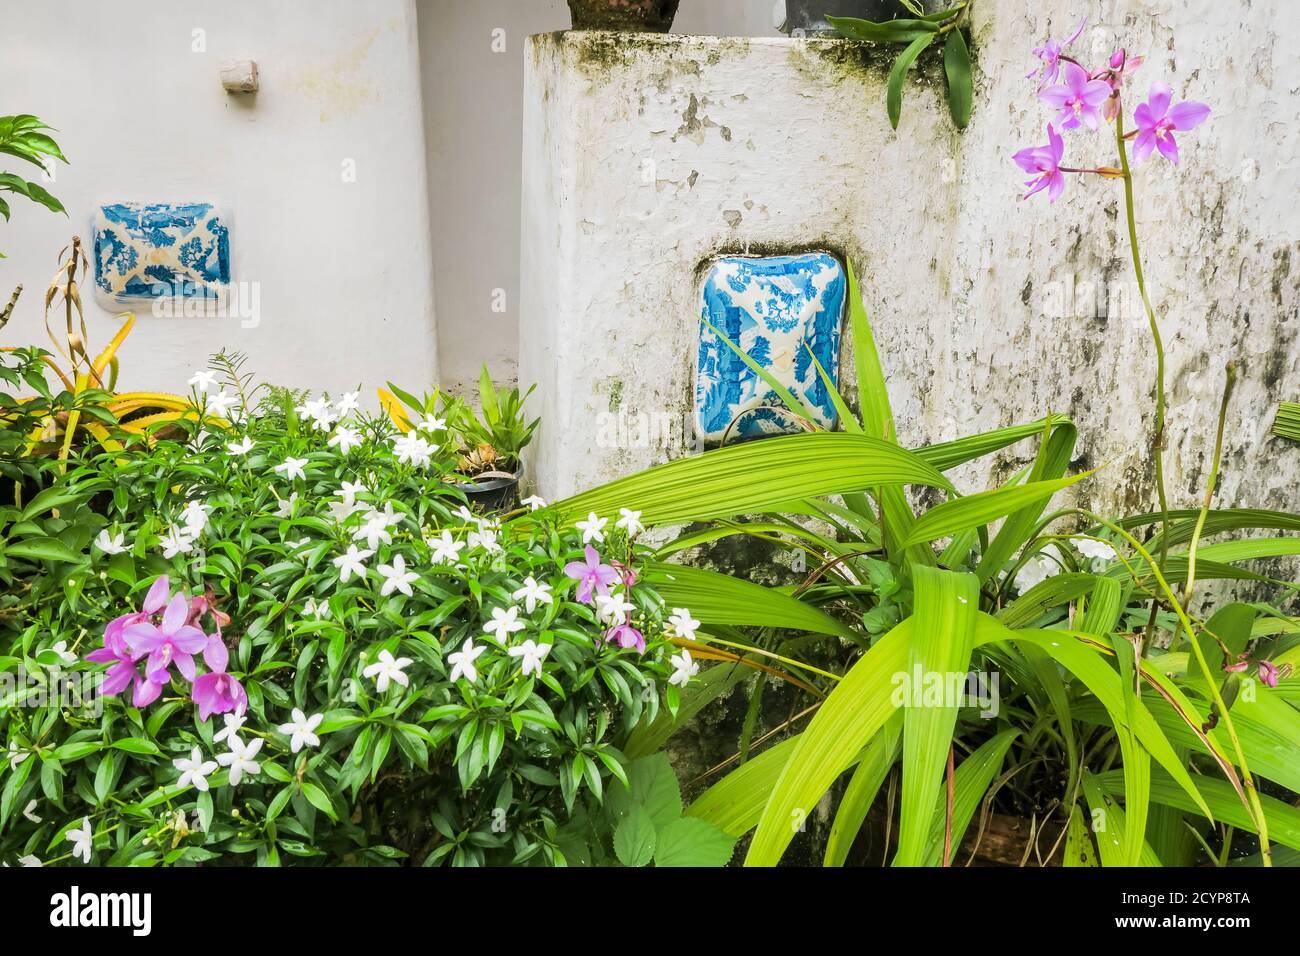 Garden detail in the Portuguese colonial style Old Courtyard Hotel in Fort Cochin; Princess St, Kochi (Cochin), Kerala, India Stock Photo